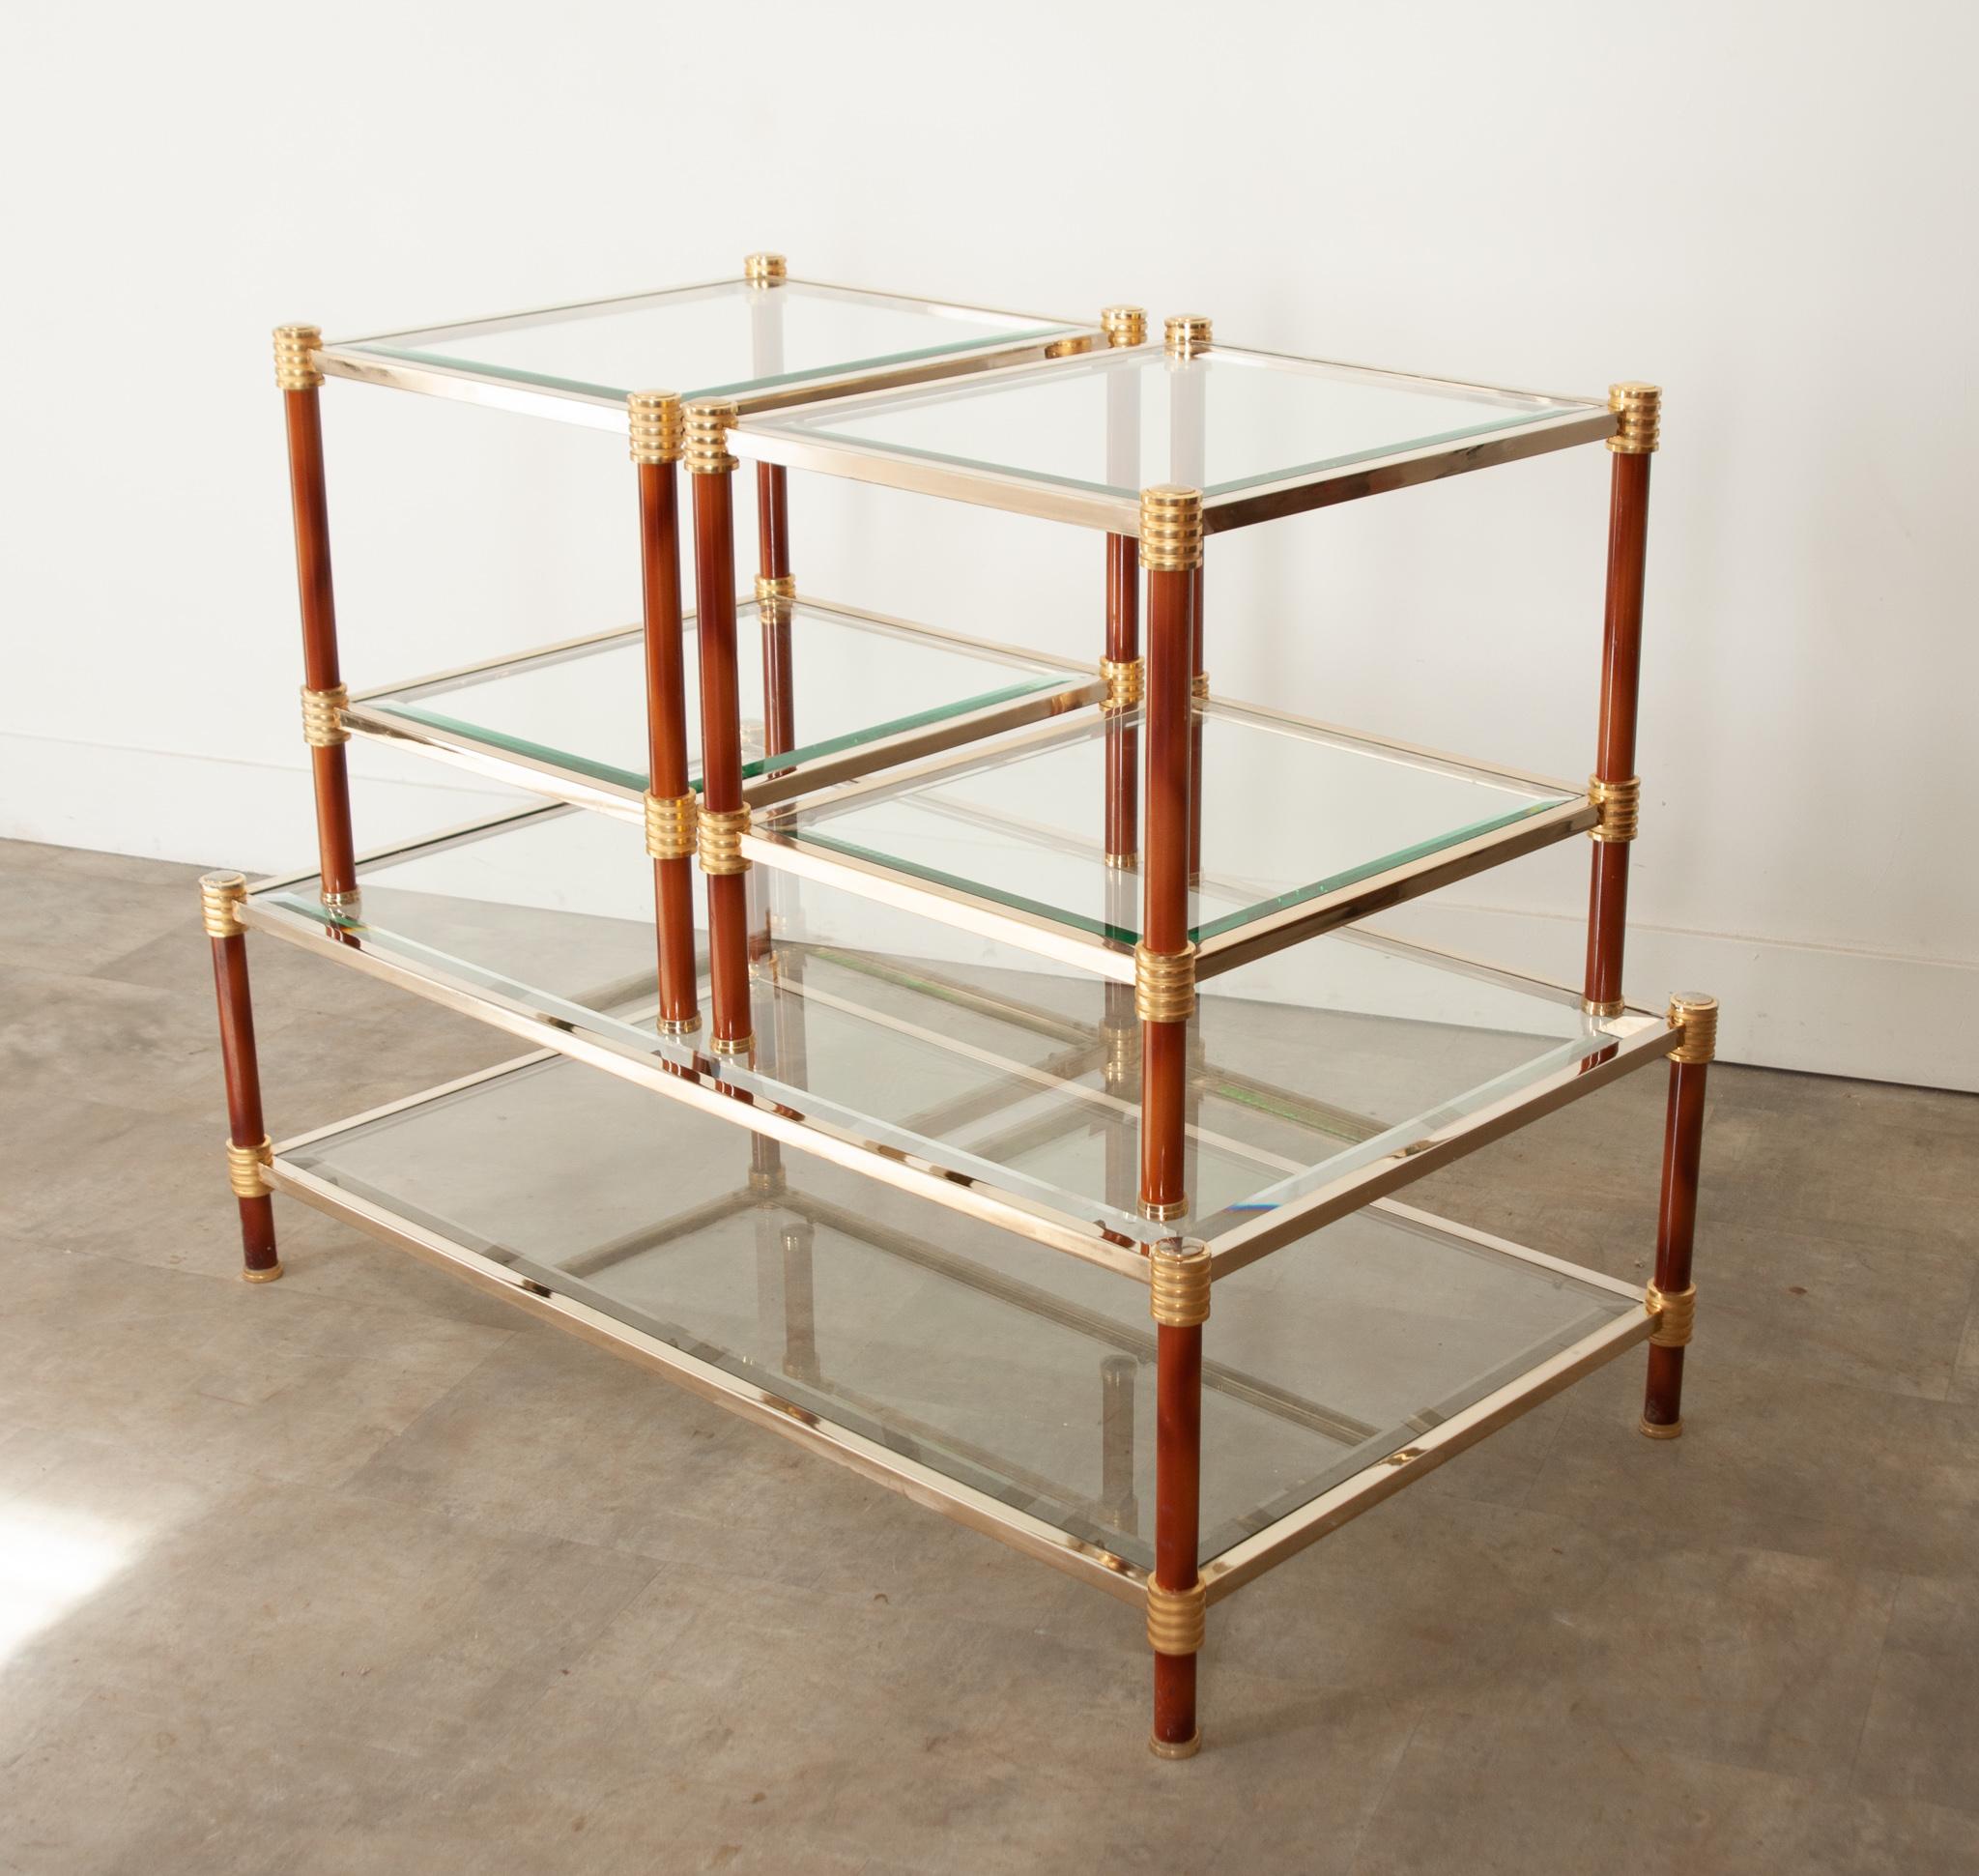 A fabulous vintage set of French brass and glass coffee and side tables with unique flair. Their frames are made of brass and supported by metal faux finished cylindrical legs with decorative brass caps. Snuggly enclosed in brass, the glass top